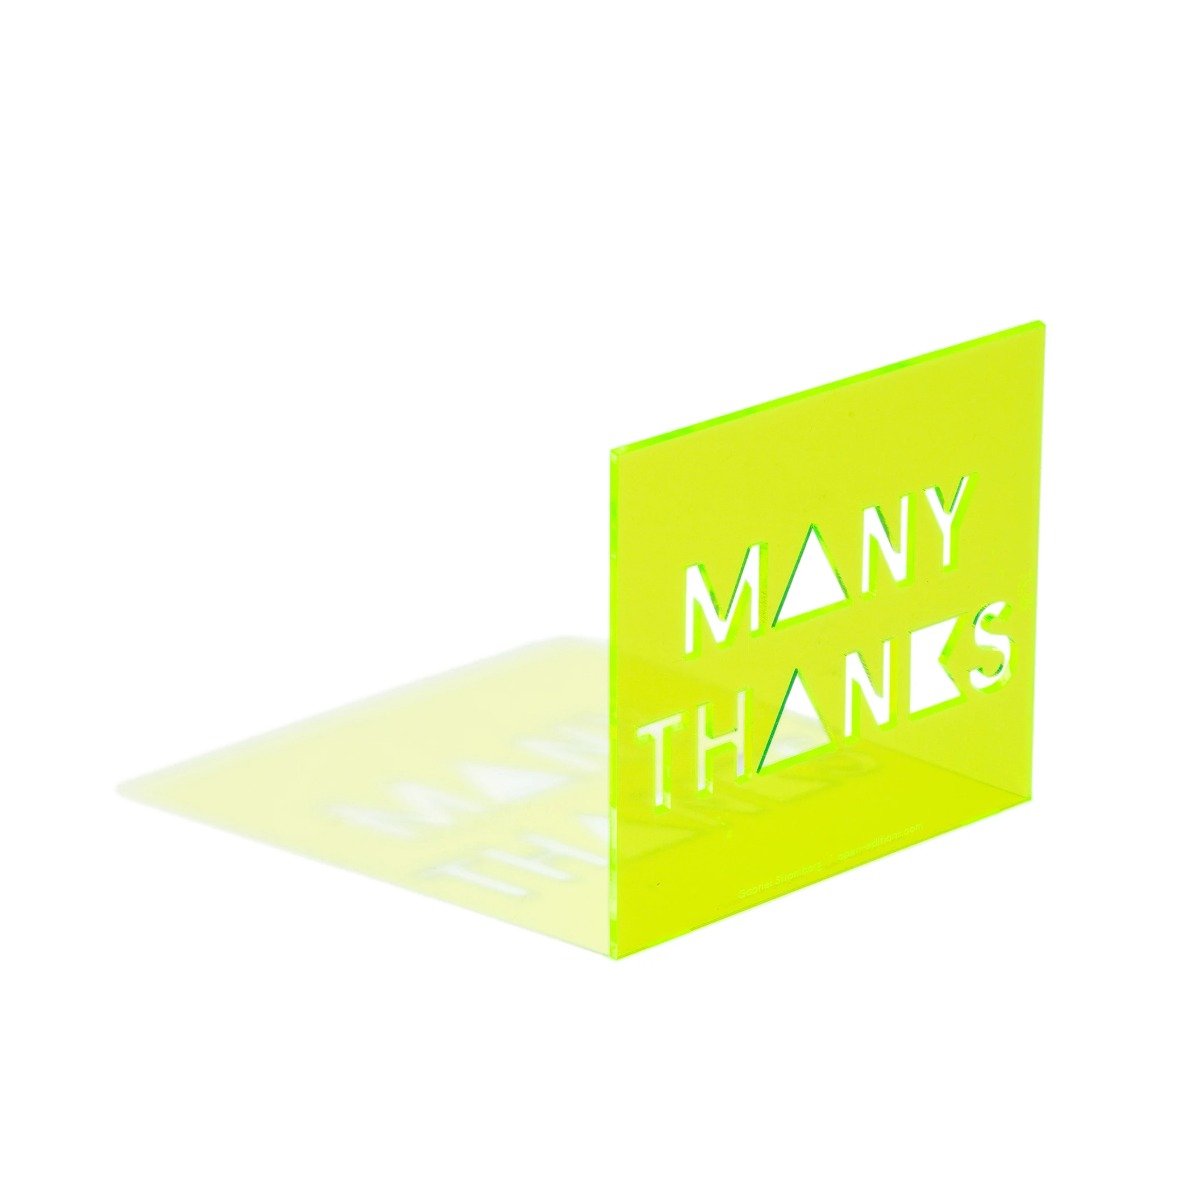 The Many Thanks Neon Greeting Card on display.